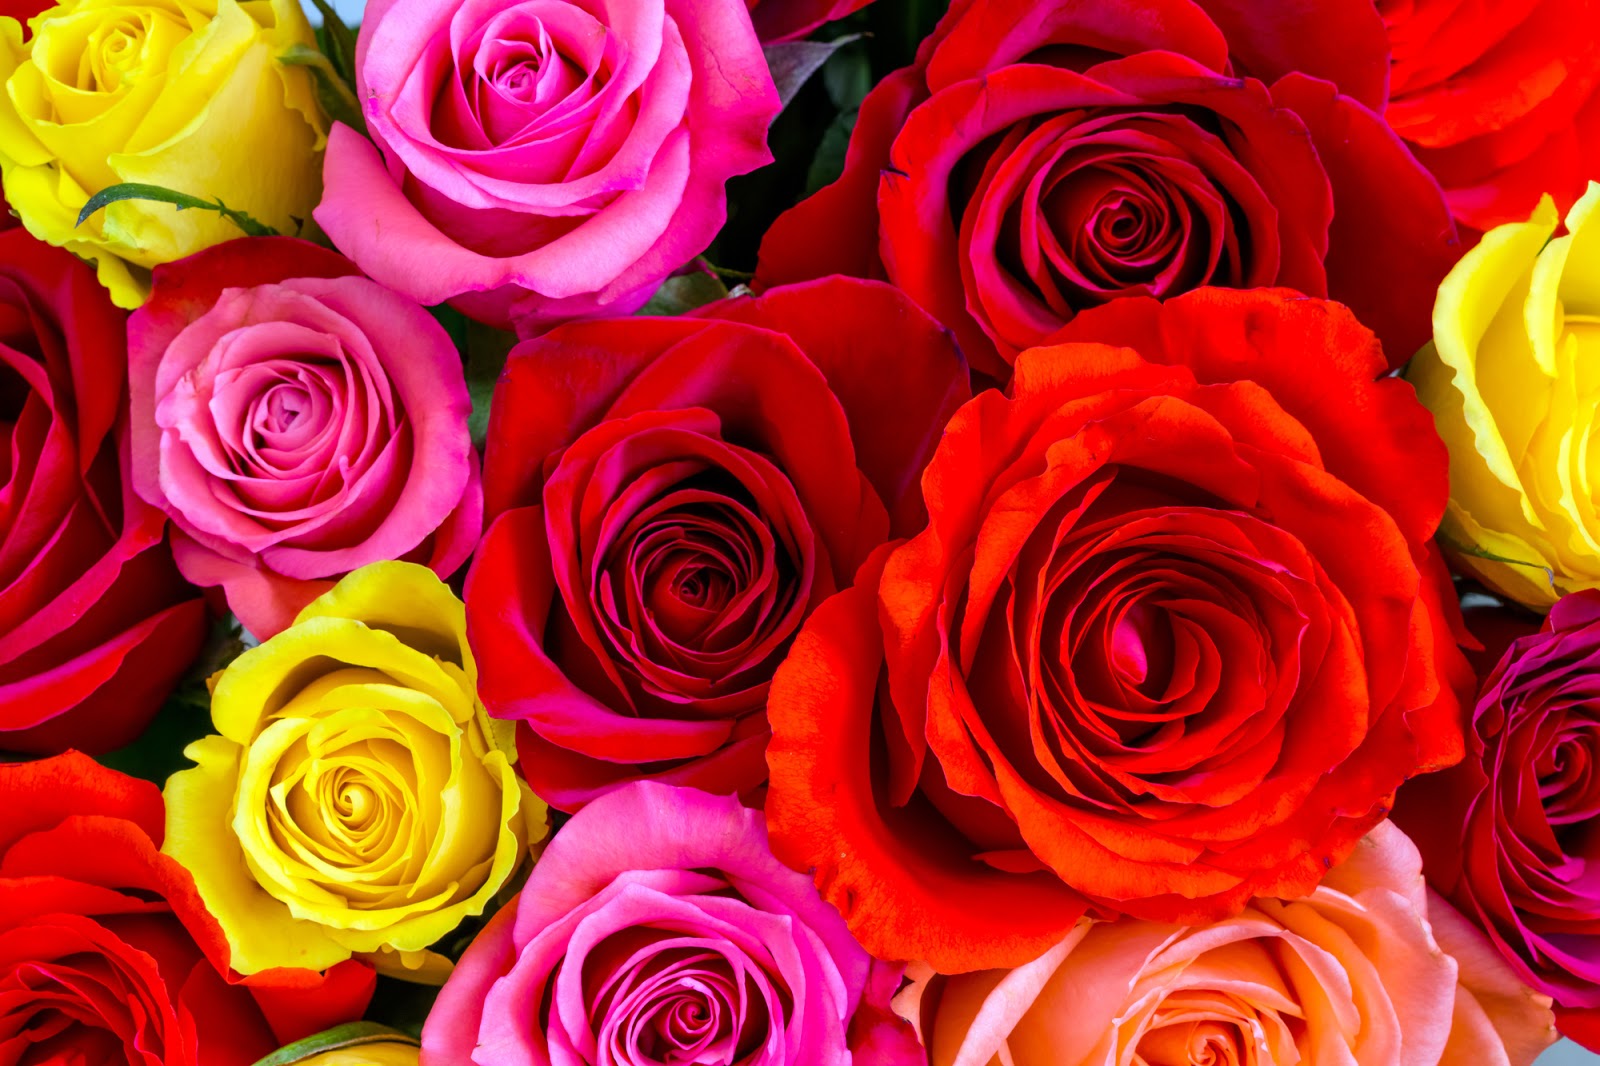 Peachtree Petals Blog: The Color of Roses: Which Colors Represent Love